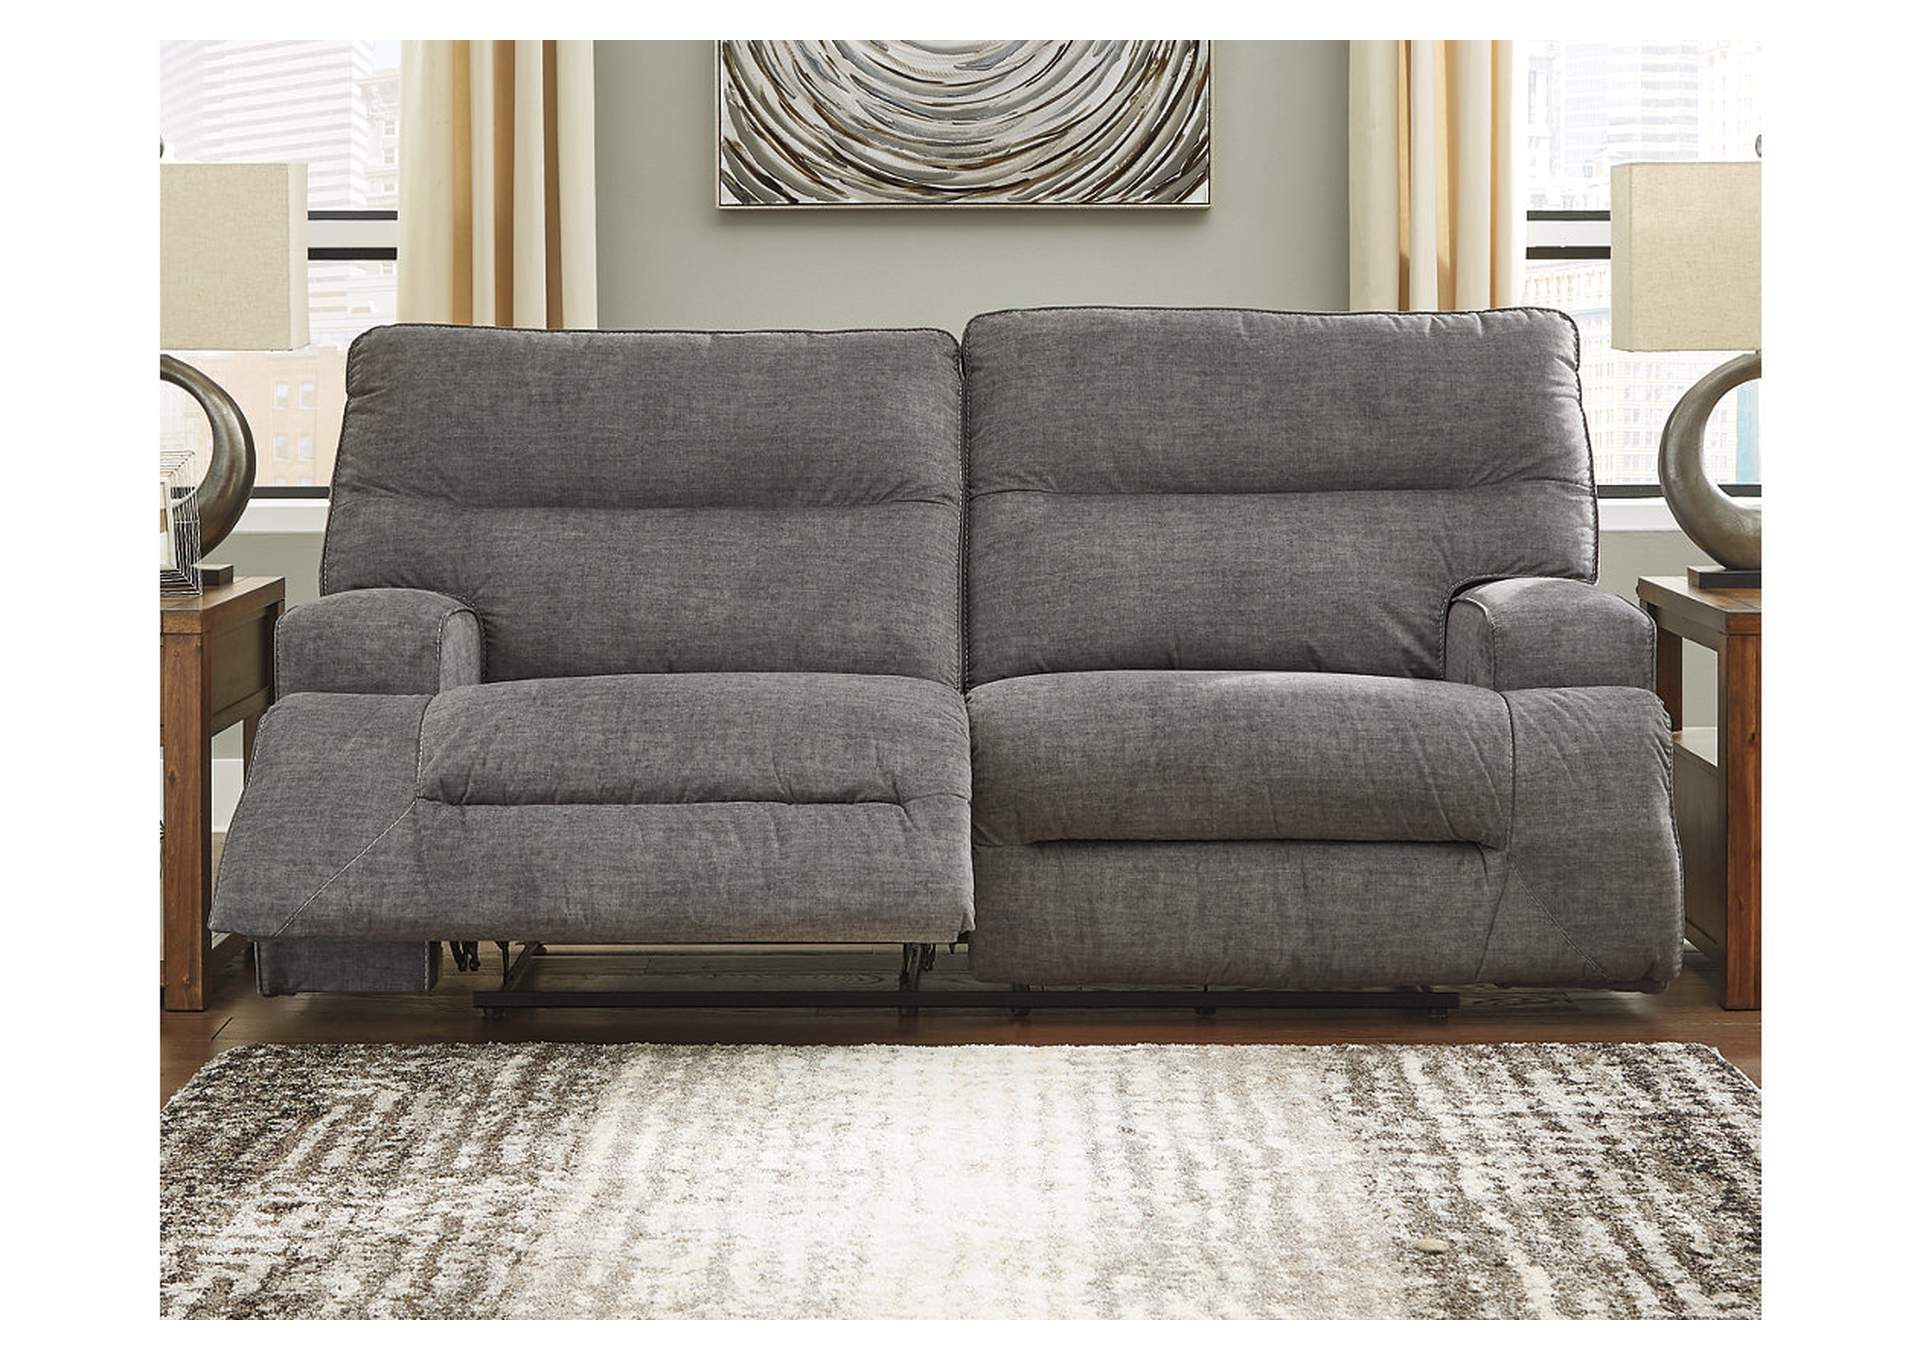 Coombs Reclining Sofa,Signature Design By Ashley